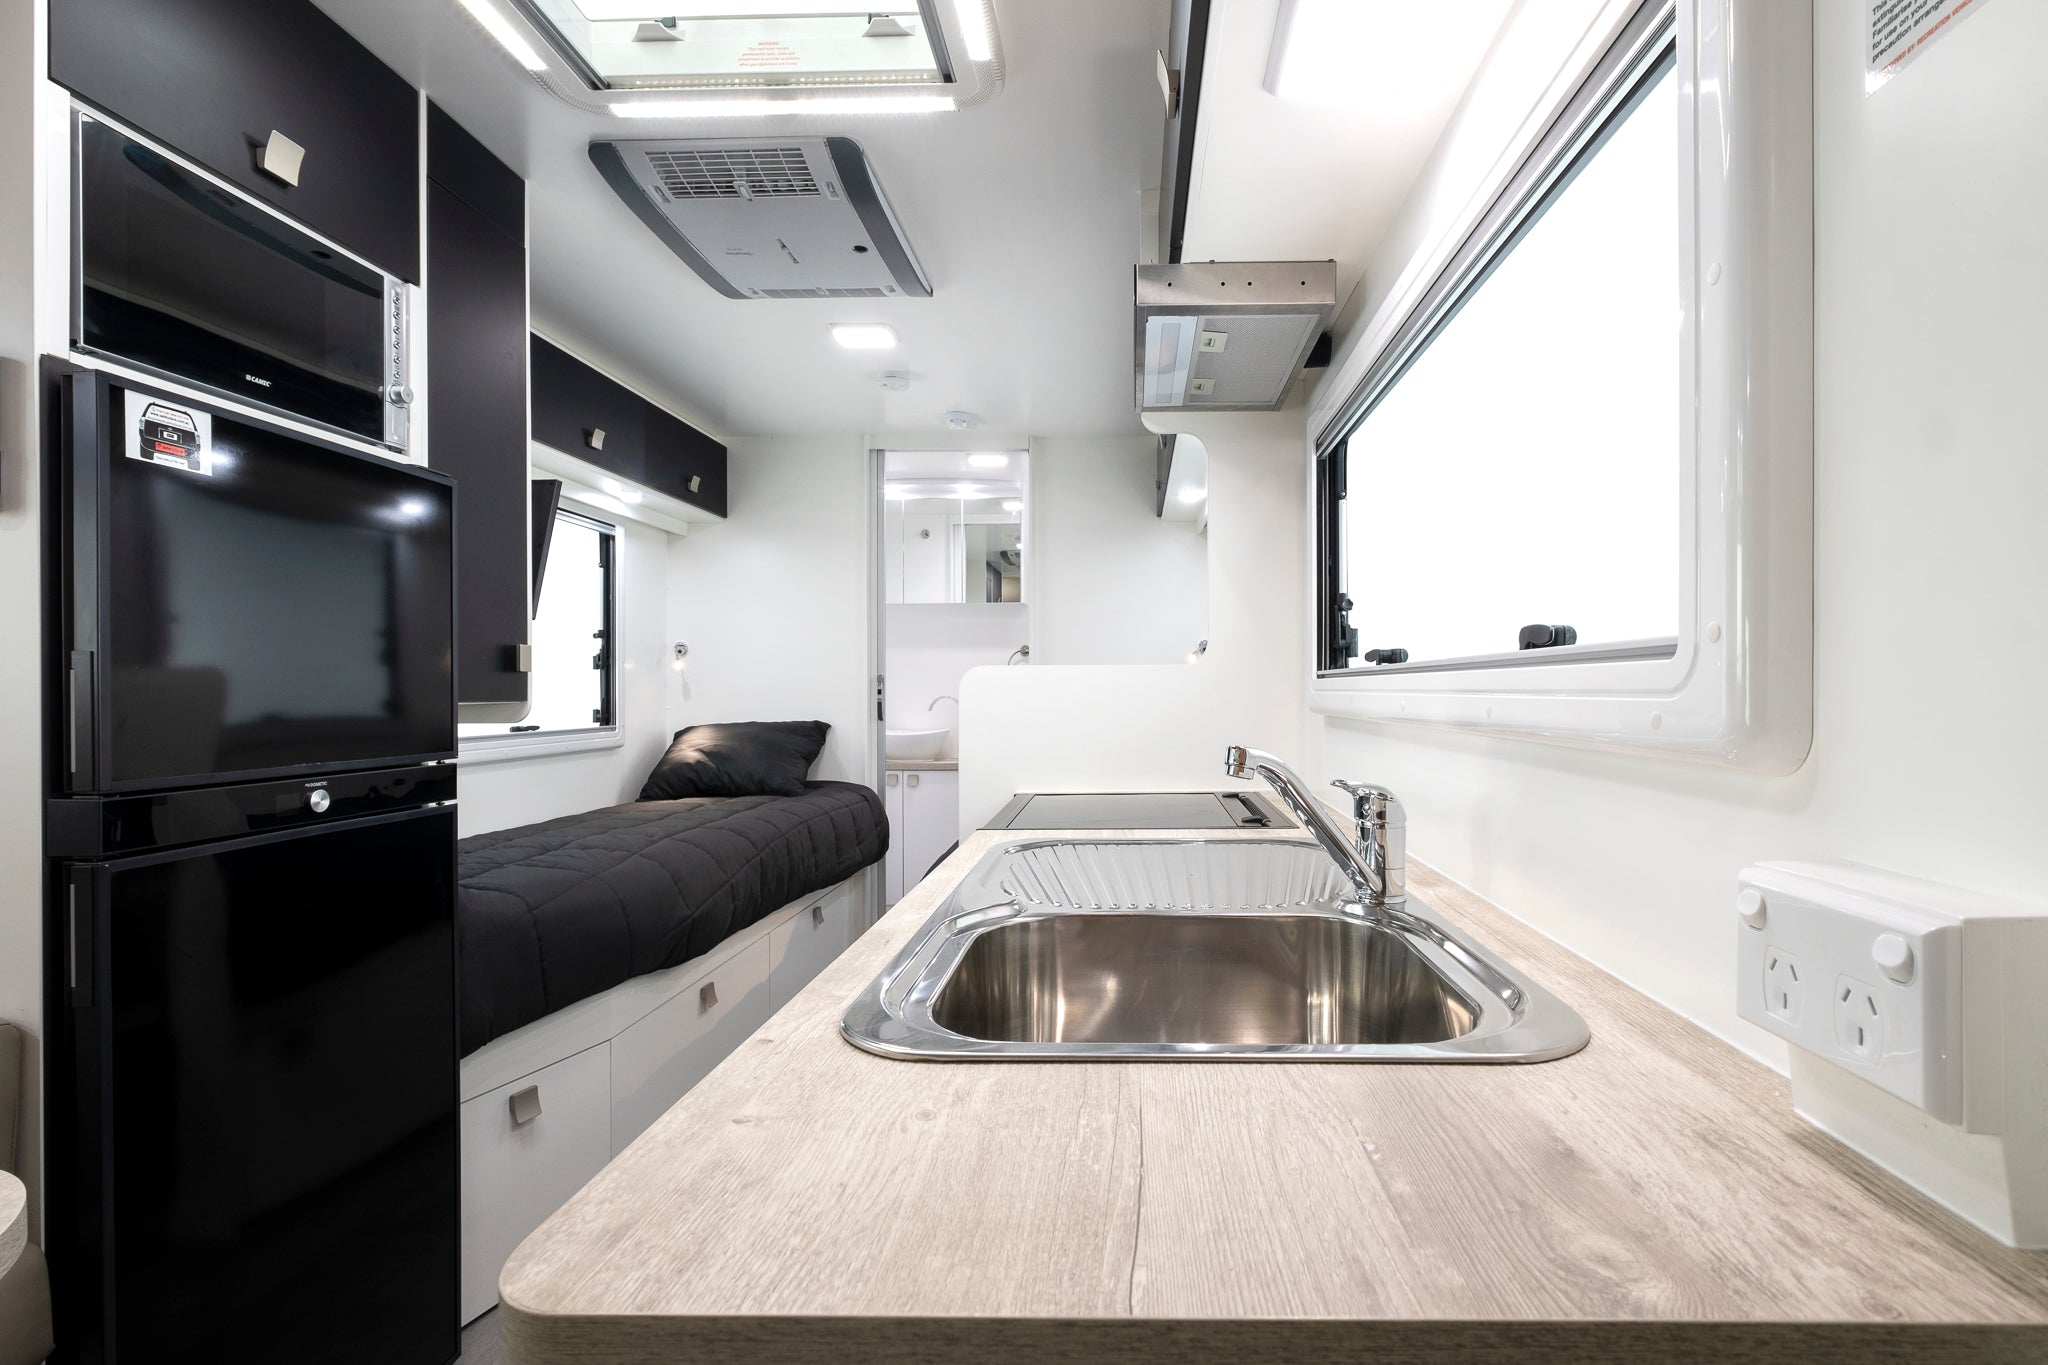 Winnebago Jervis kitchen and single bed